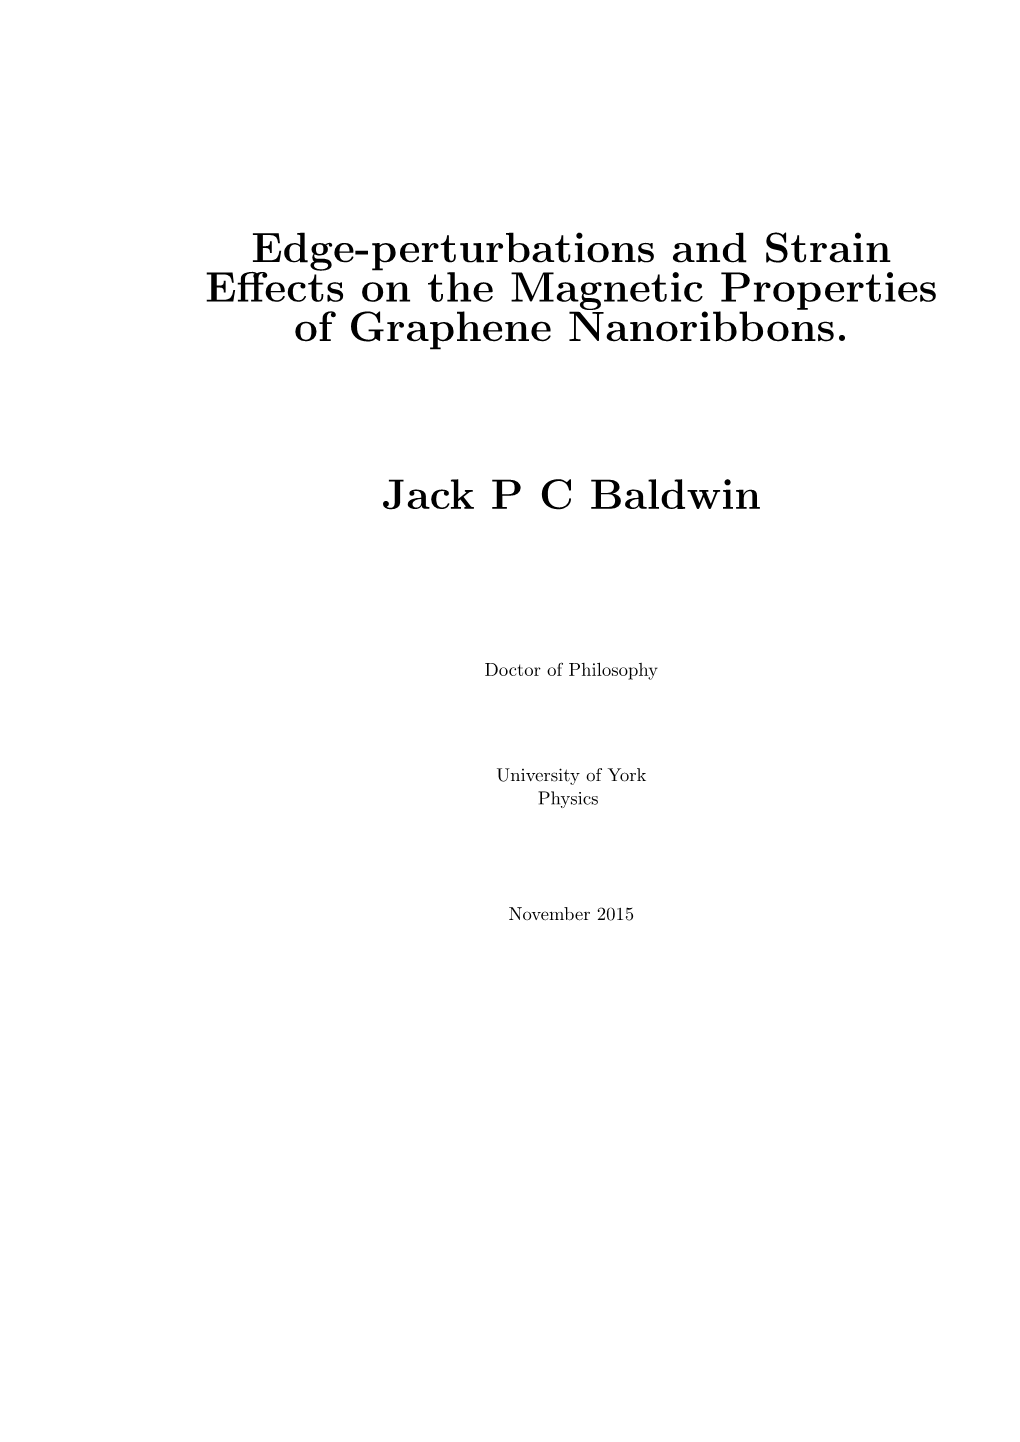 Edge-Perturbations and Strain Effects on the Magnetic Properties Of